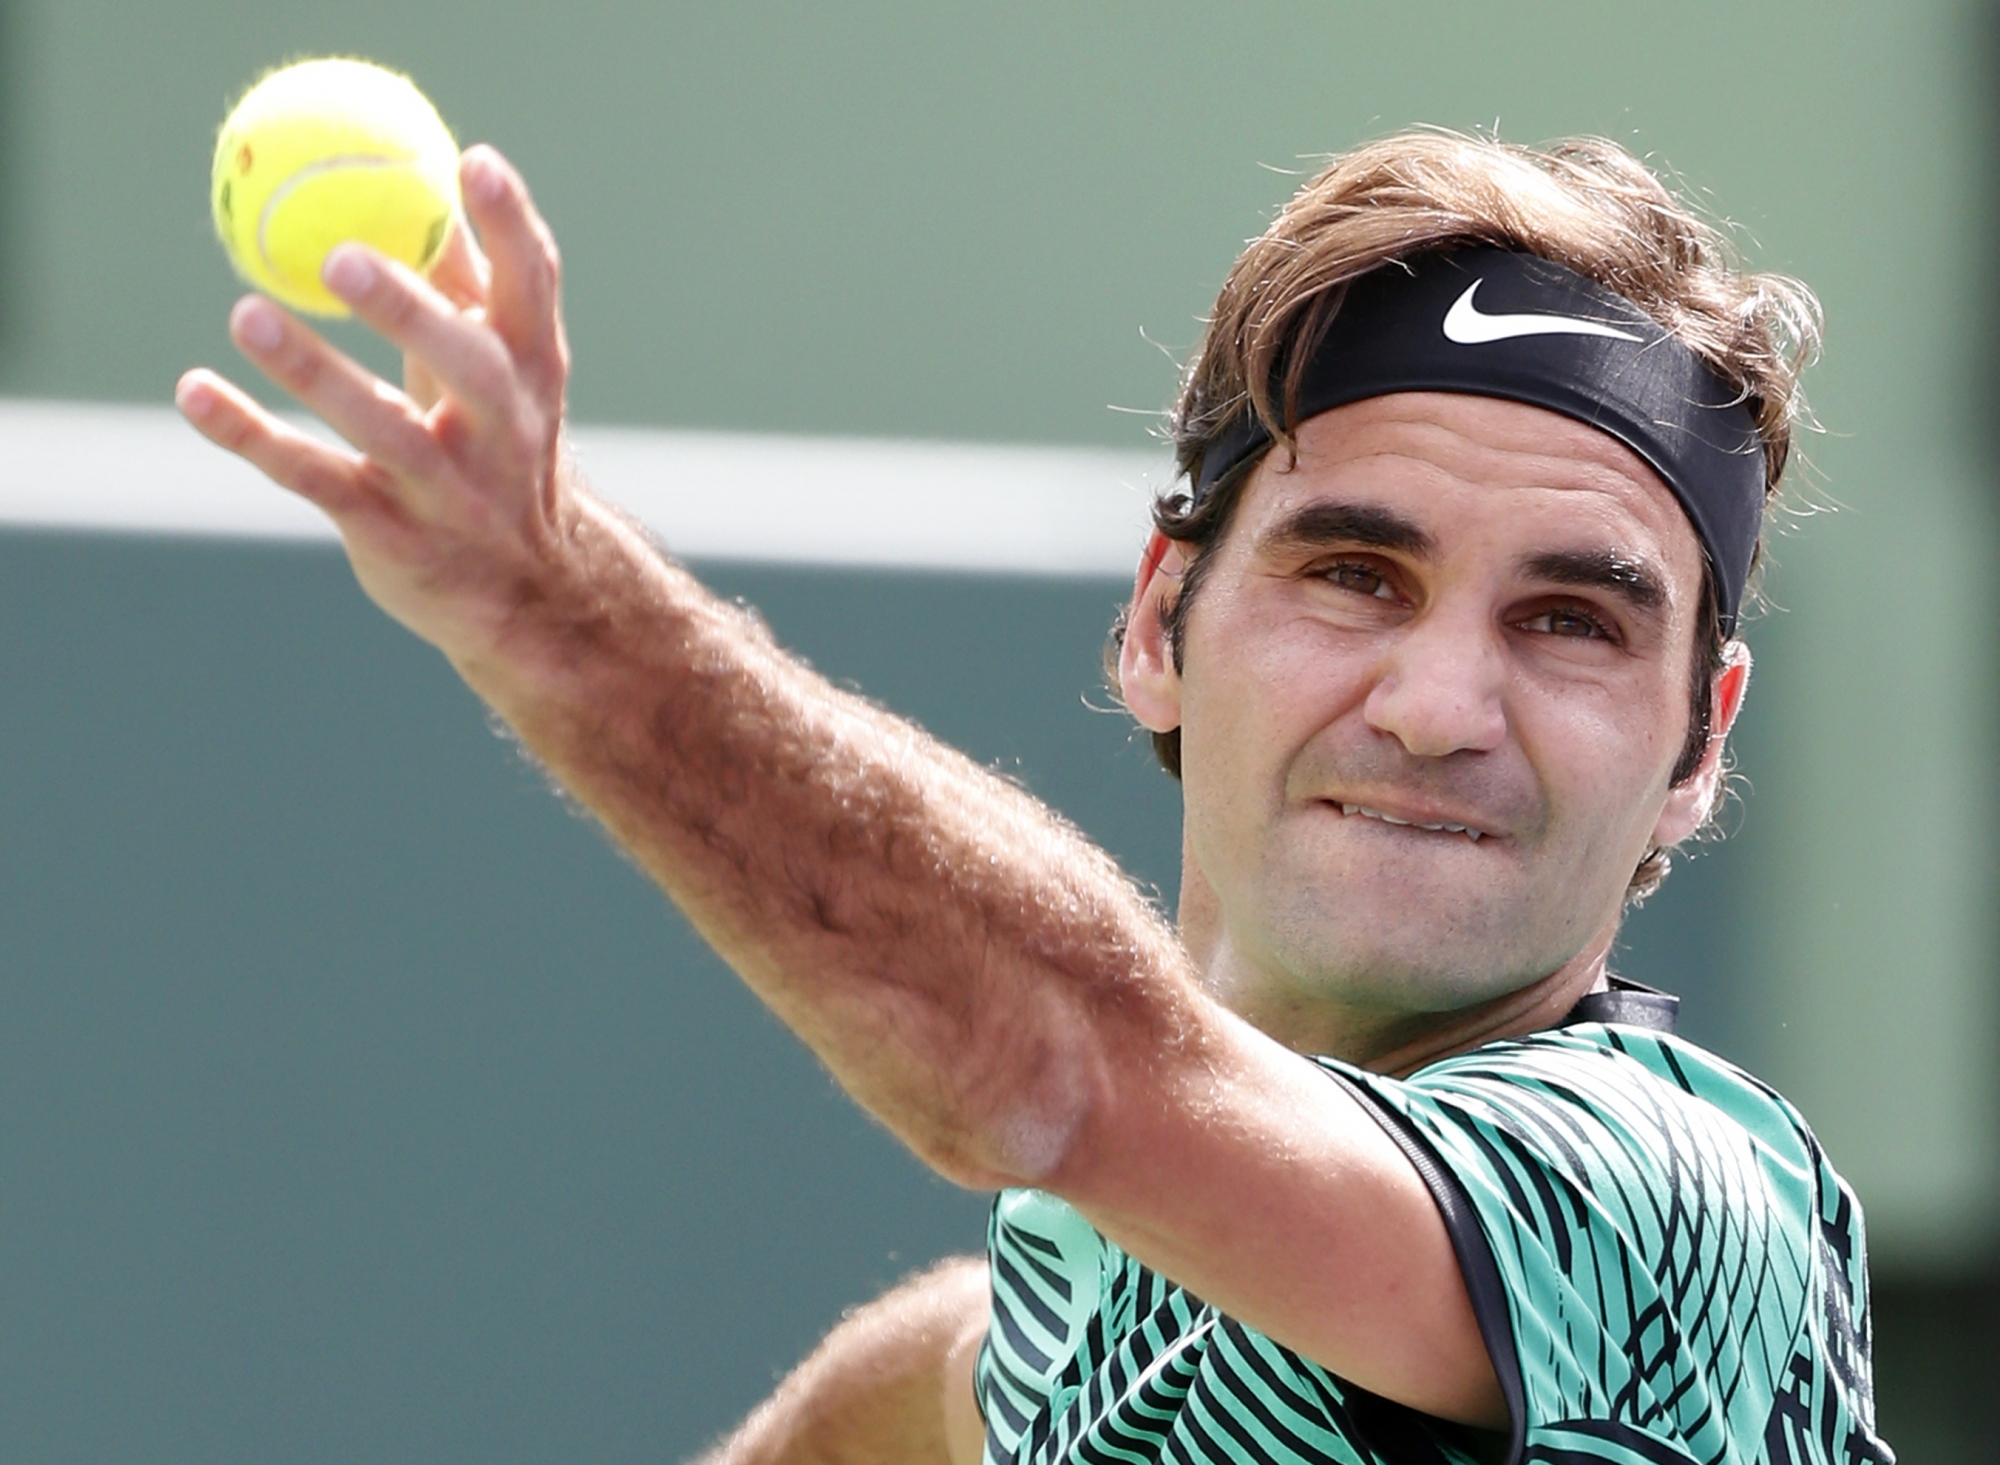 Roger Federer, of Switzerland, tosses the ball to serve to Frances Tiafoe during a tennis match at the Miami Open, Saturday, March 25, 2017 in Key Biscayne, Fla. (AP Photo/Wilfredo Lee)